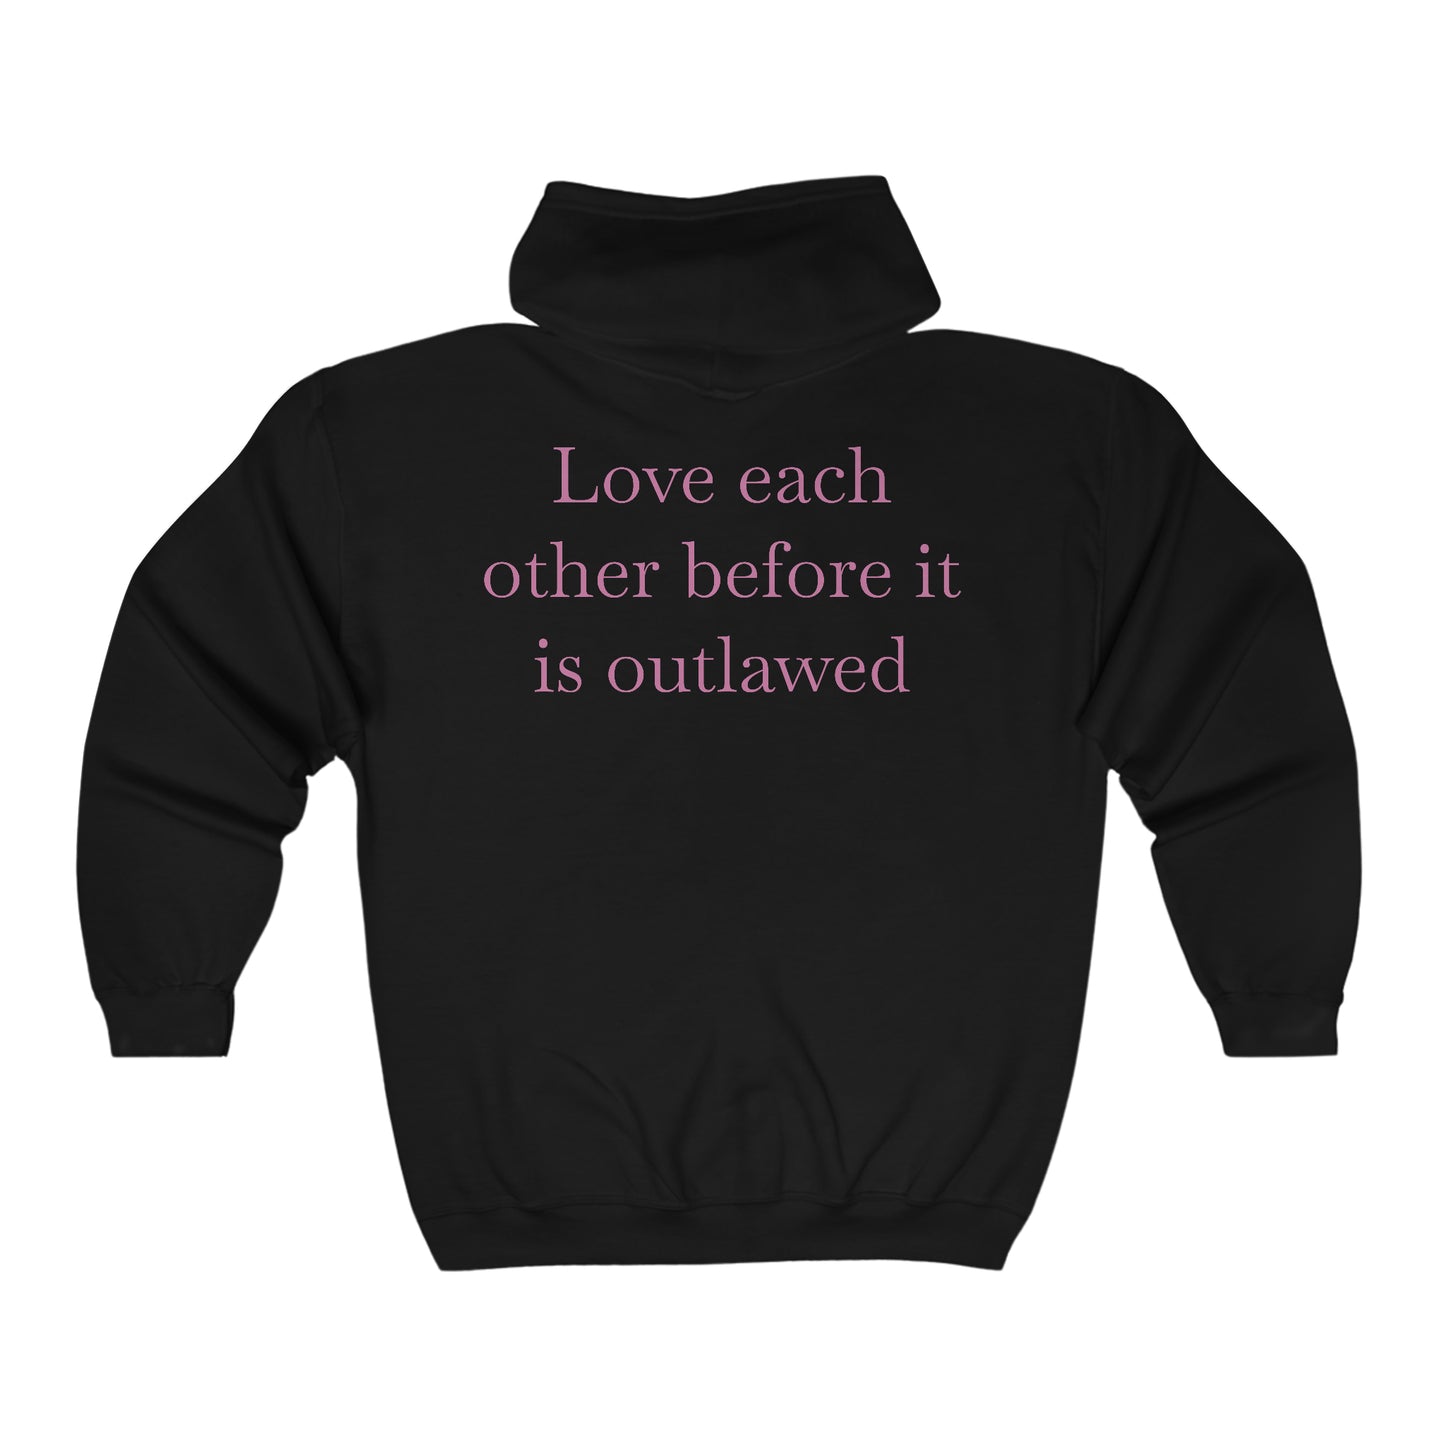 Love each other before it is outlawed